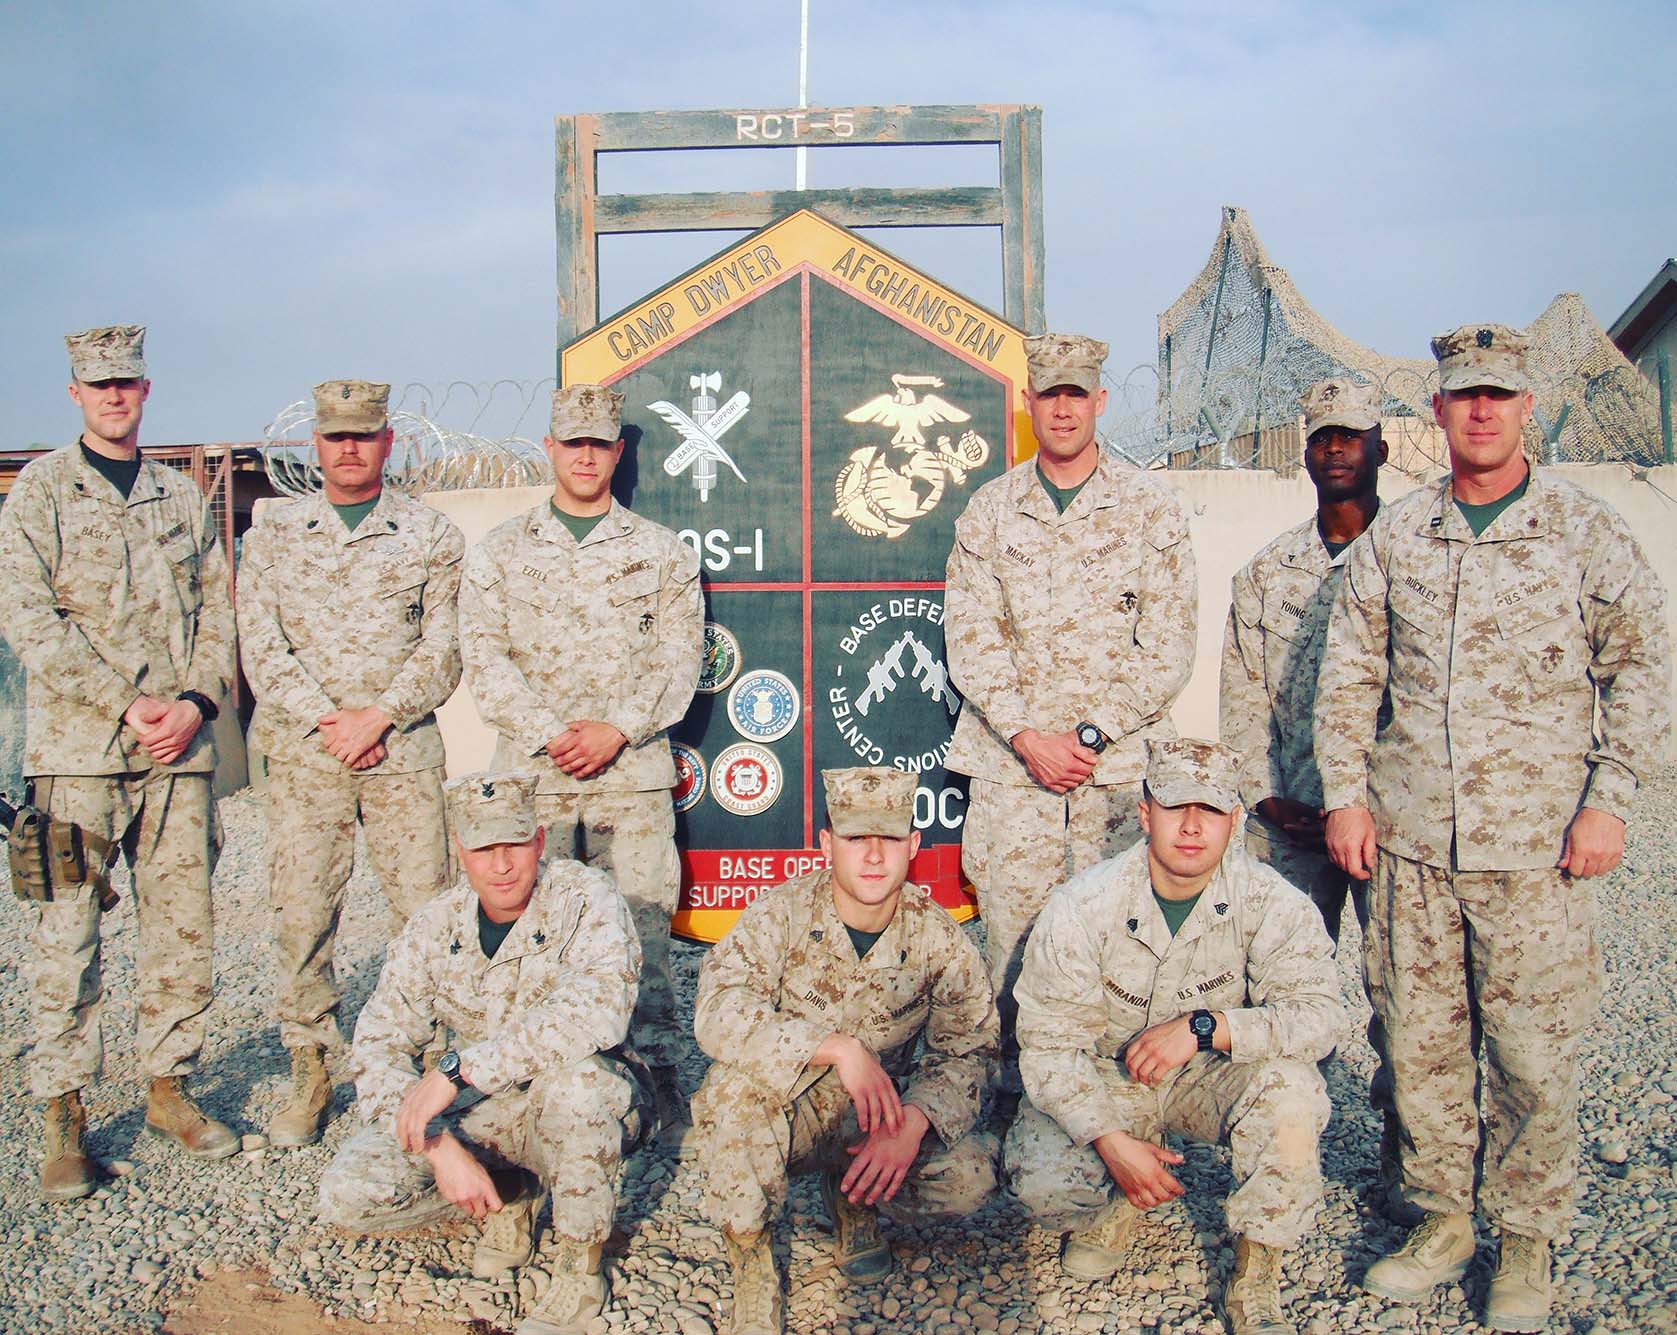 Photo of Edgar Miranda (squatting, far right) with fellow service members at Camp Dwyer in Afghanistan. They all wear a camouflage uniform and hat as they pose for a photo.